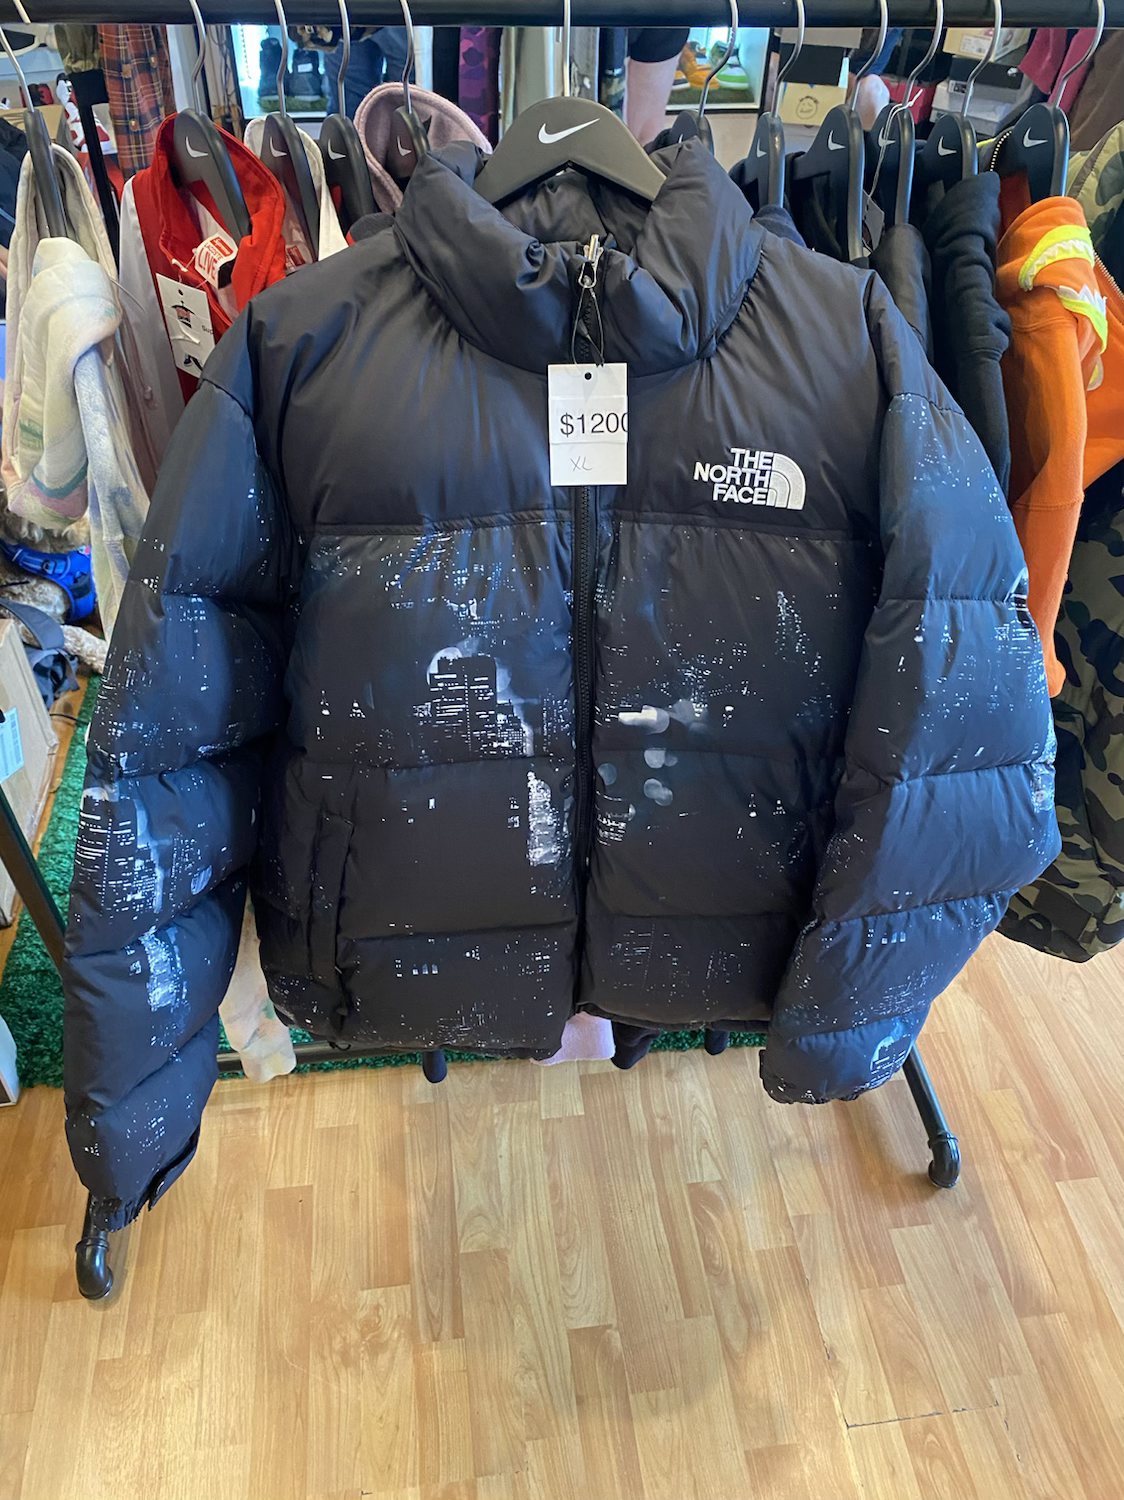 Extra Butter The North face sz XL | eBay